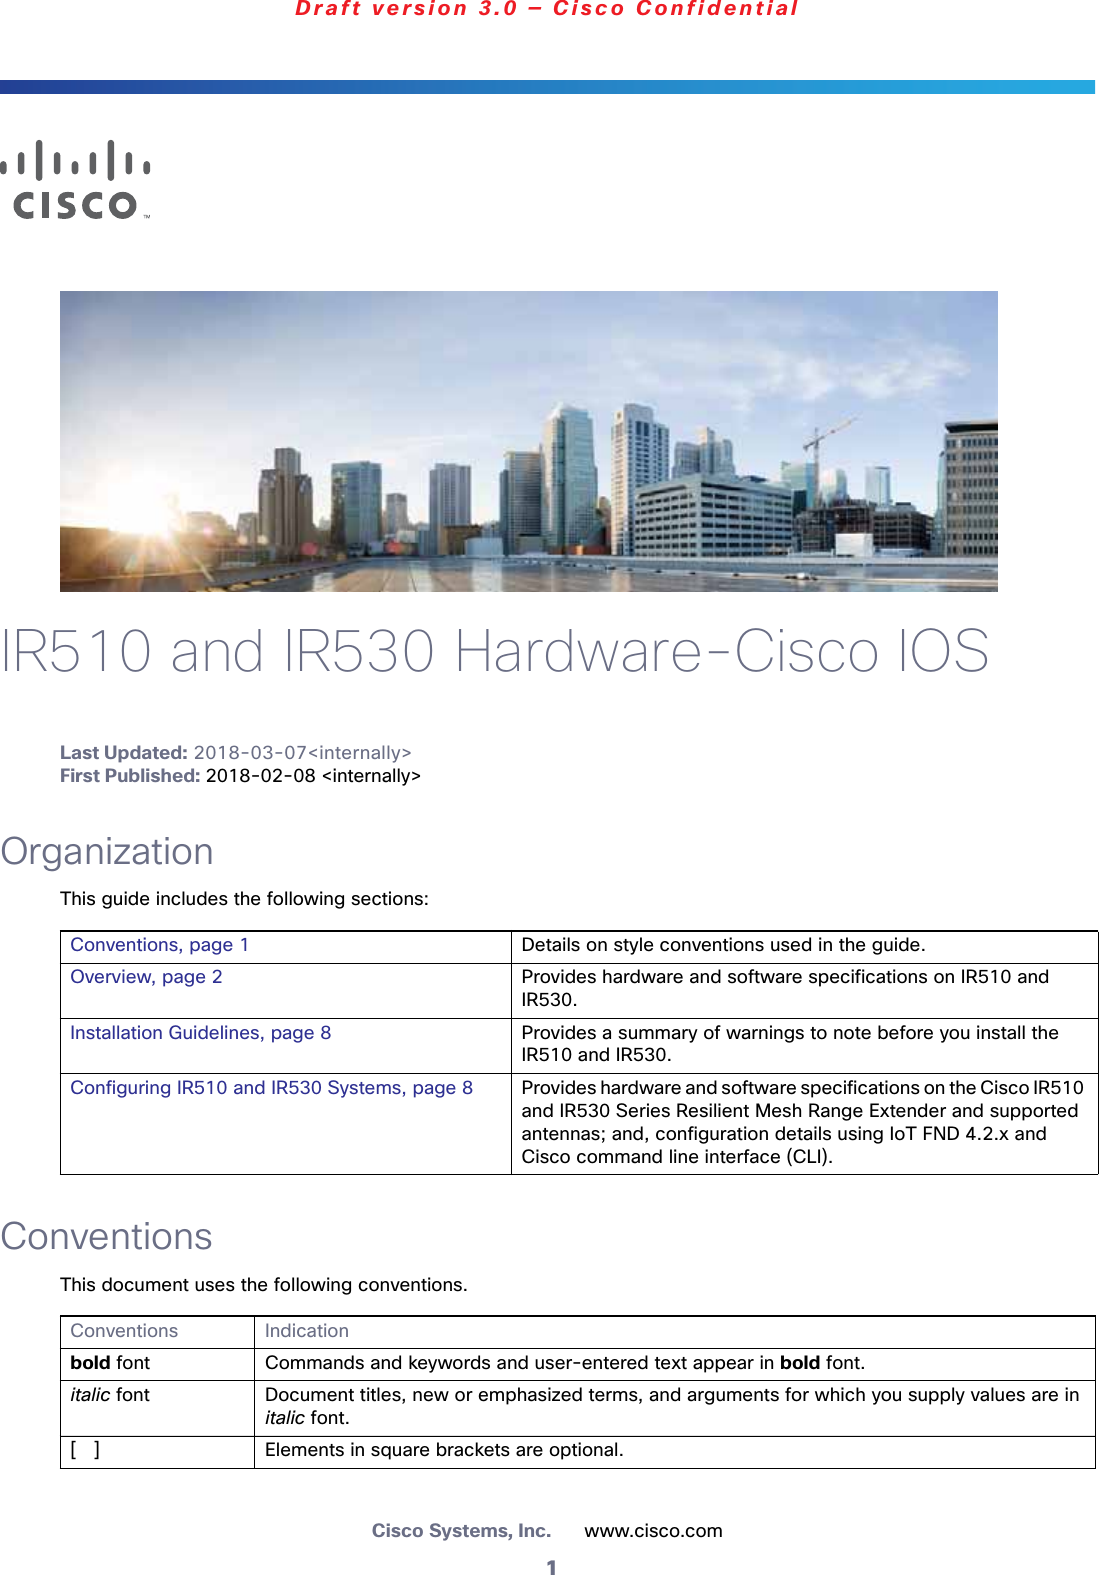 1Cisco Systems, Inc.      www.cisco.comDraft version 3.0 — Cisco ConfidentialIR510 and IR530 Hardware-Cisco IOSLast Updated: 2018-03-07&lt;internally&gt;First Published: 2018-02-08 &lt;internally&gt;OrganizationThis guide includes the following sections:ConventionsThis document uses the following conventions. Conventions, page 1 Details on style conventions used in the guide.Overview, page 2 Provides hardware and software specifications on IR510 and IR530.Installation Guidelines, page 8 Provides a summary of warnings to note before you install the IR510 and IR530.Configuring IR510 and IR530 Systems, page 8 Provides hardware and software specifications on the Cisco IR510 and IR530 Series Resilient Mesh Range Extender and supported antennas; and, configuration details using IoT FND 4.2.x and Cisco command line interface (CLI).Conventions Indicationbold font Commands and keywords and user-entered text appear in bold font.italic font Document titles, new or emphasized terms, and arguments for which you supply values are in italic font.[   ] Elements in square brackets are optional.